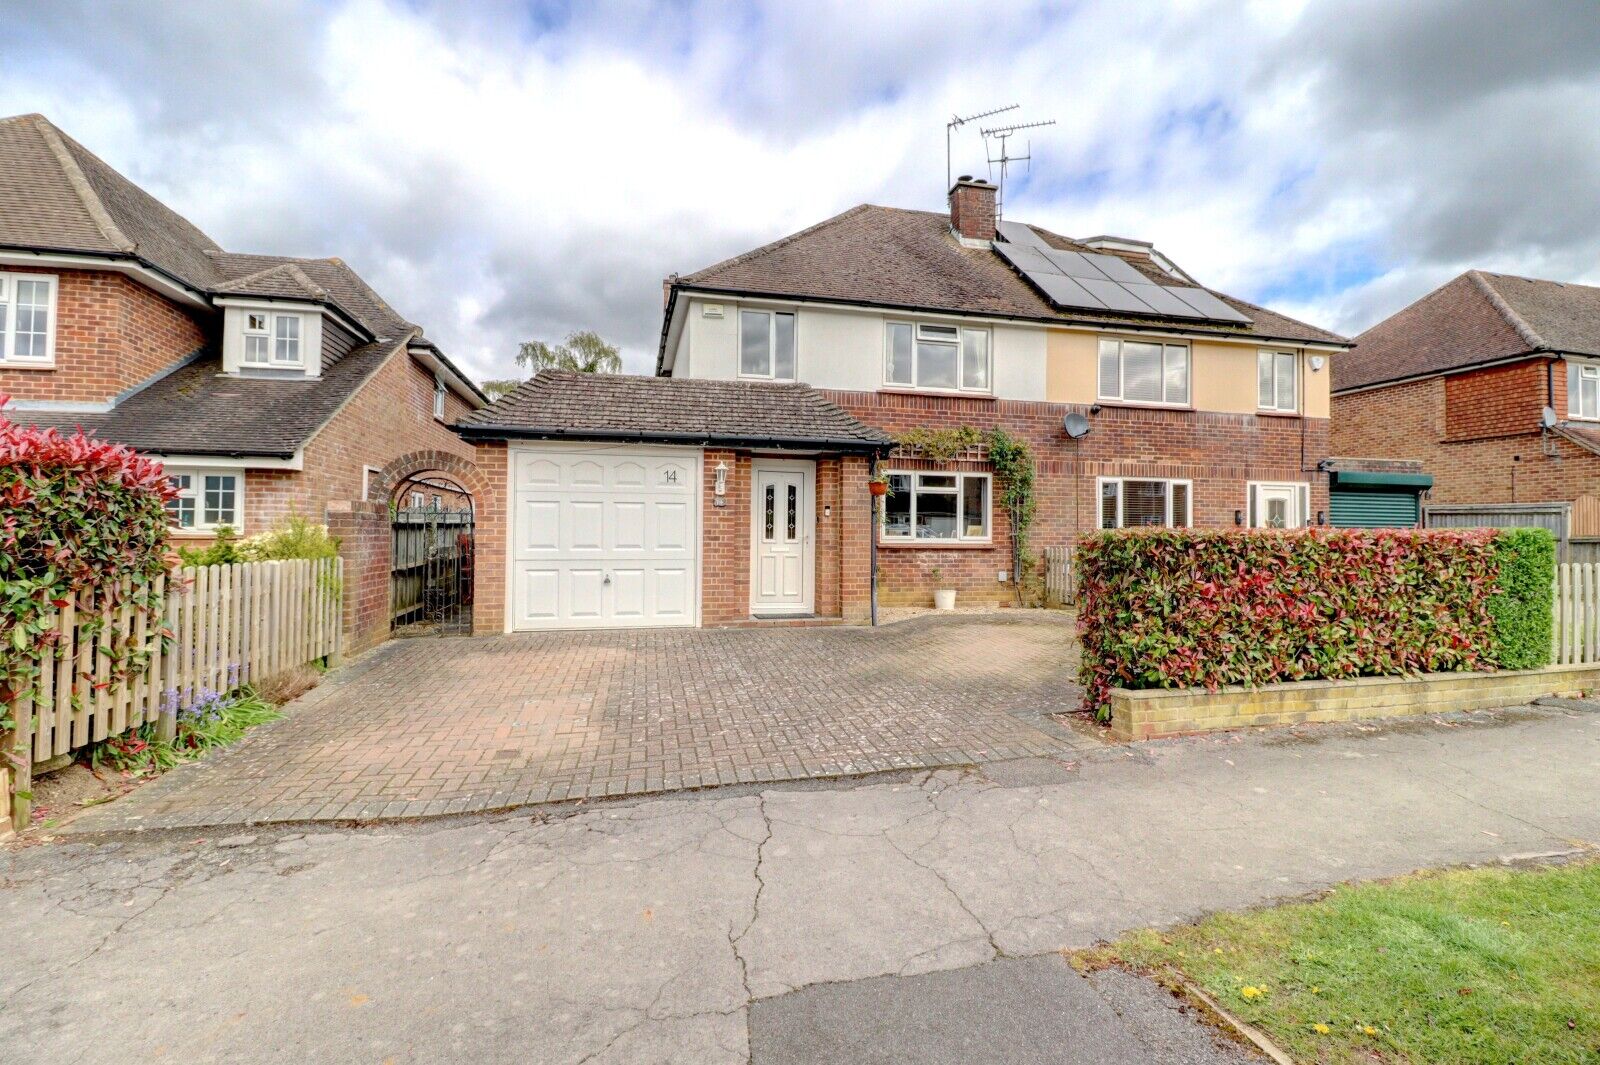 3 bedroom semi detached house for sale Old Kiln Road, Penn, HP10, main image